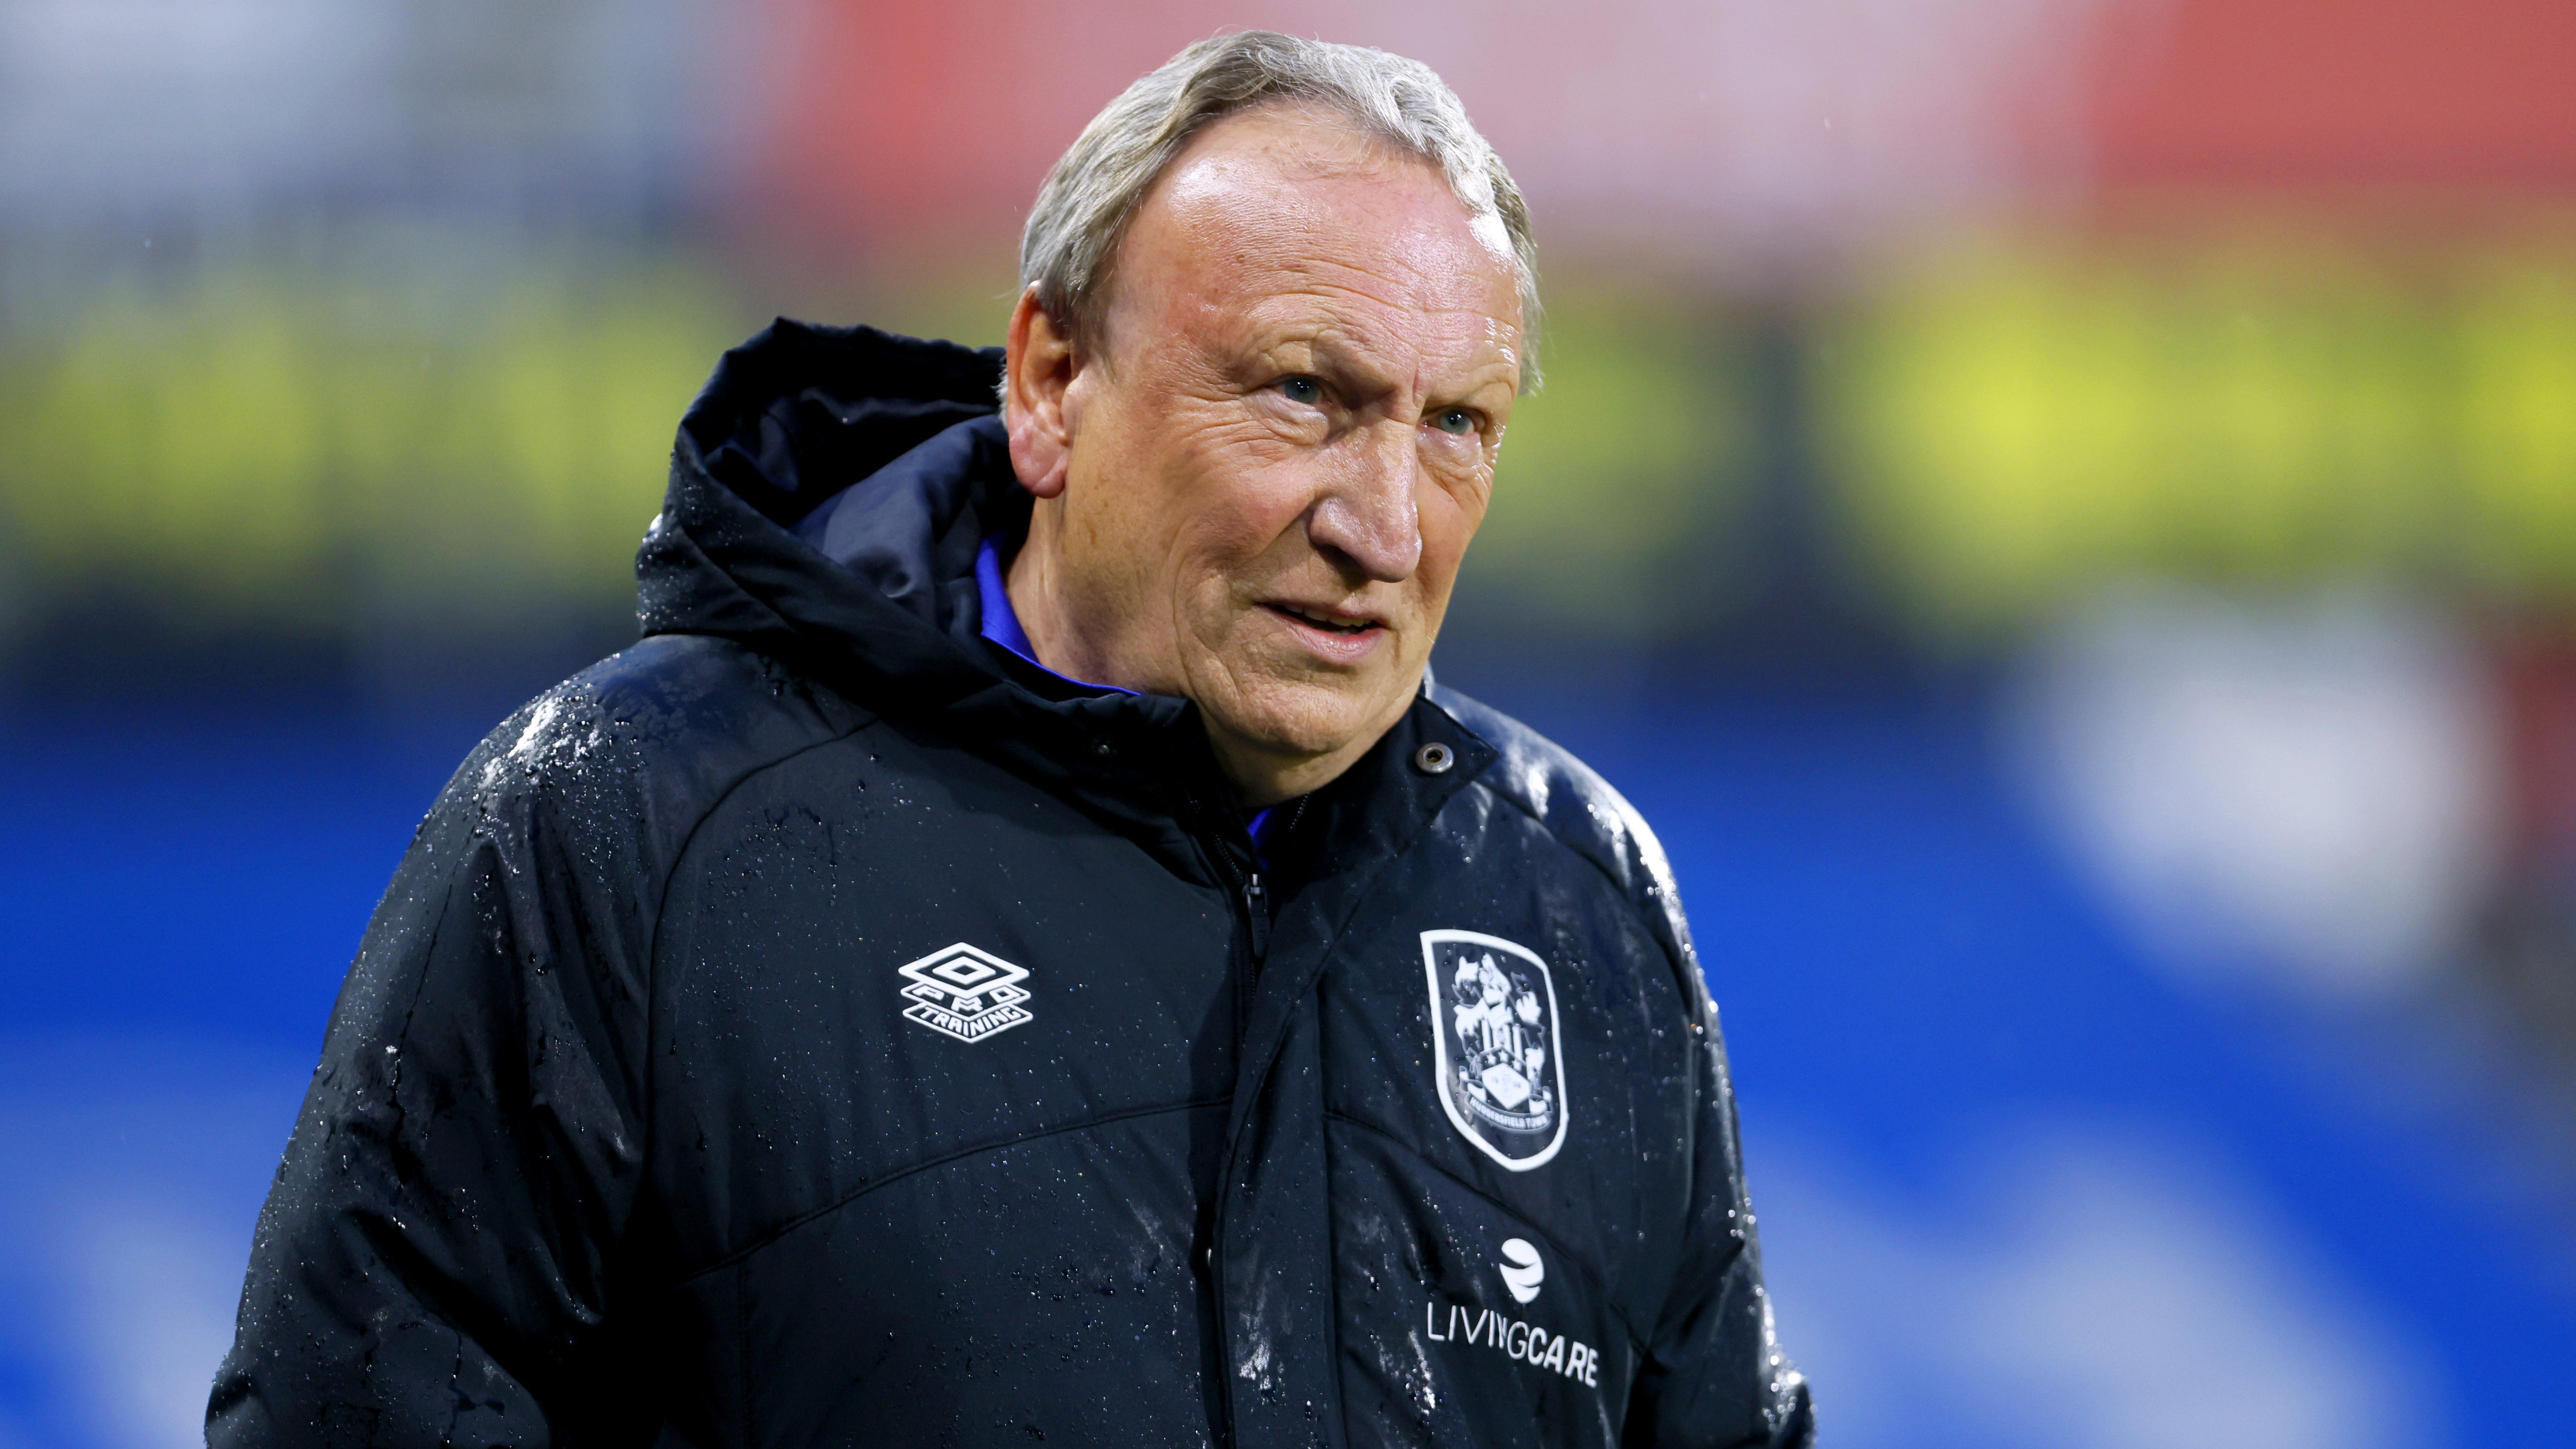 Neil Warnock set to be named interim manager at Aberdeen – reports